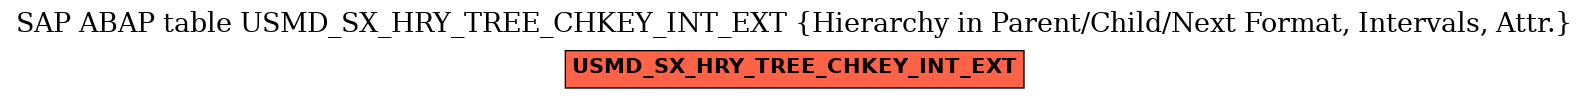 E-R Diagram for table USMD_SX_HRY_TREE_CHKEY_INT_EXT (Hierarchy in Parent/Child/Next Format, Intervals, Attr.)